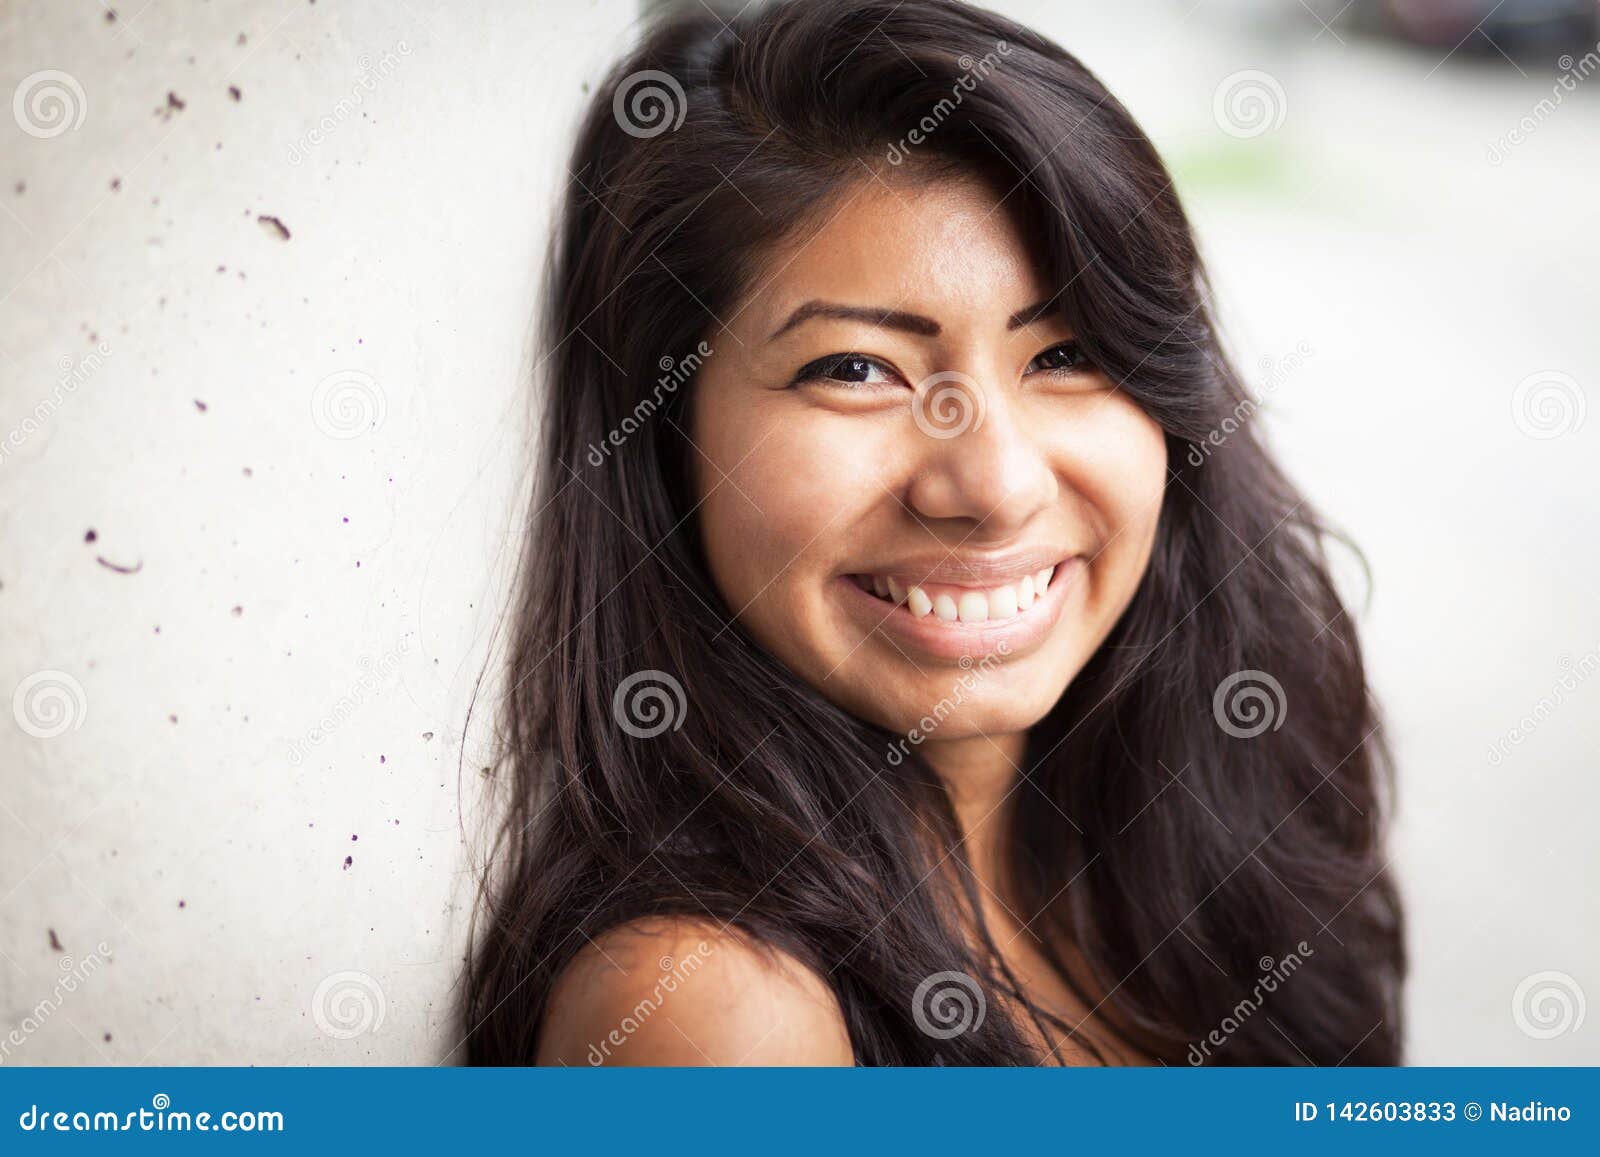 Young Spanish Woman Smiling At The Camera. She Is Leaning ...